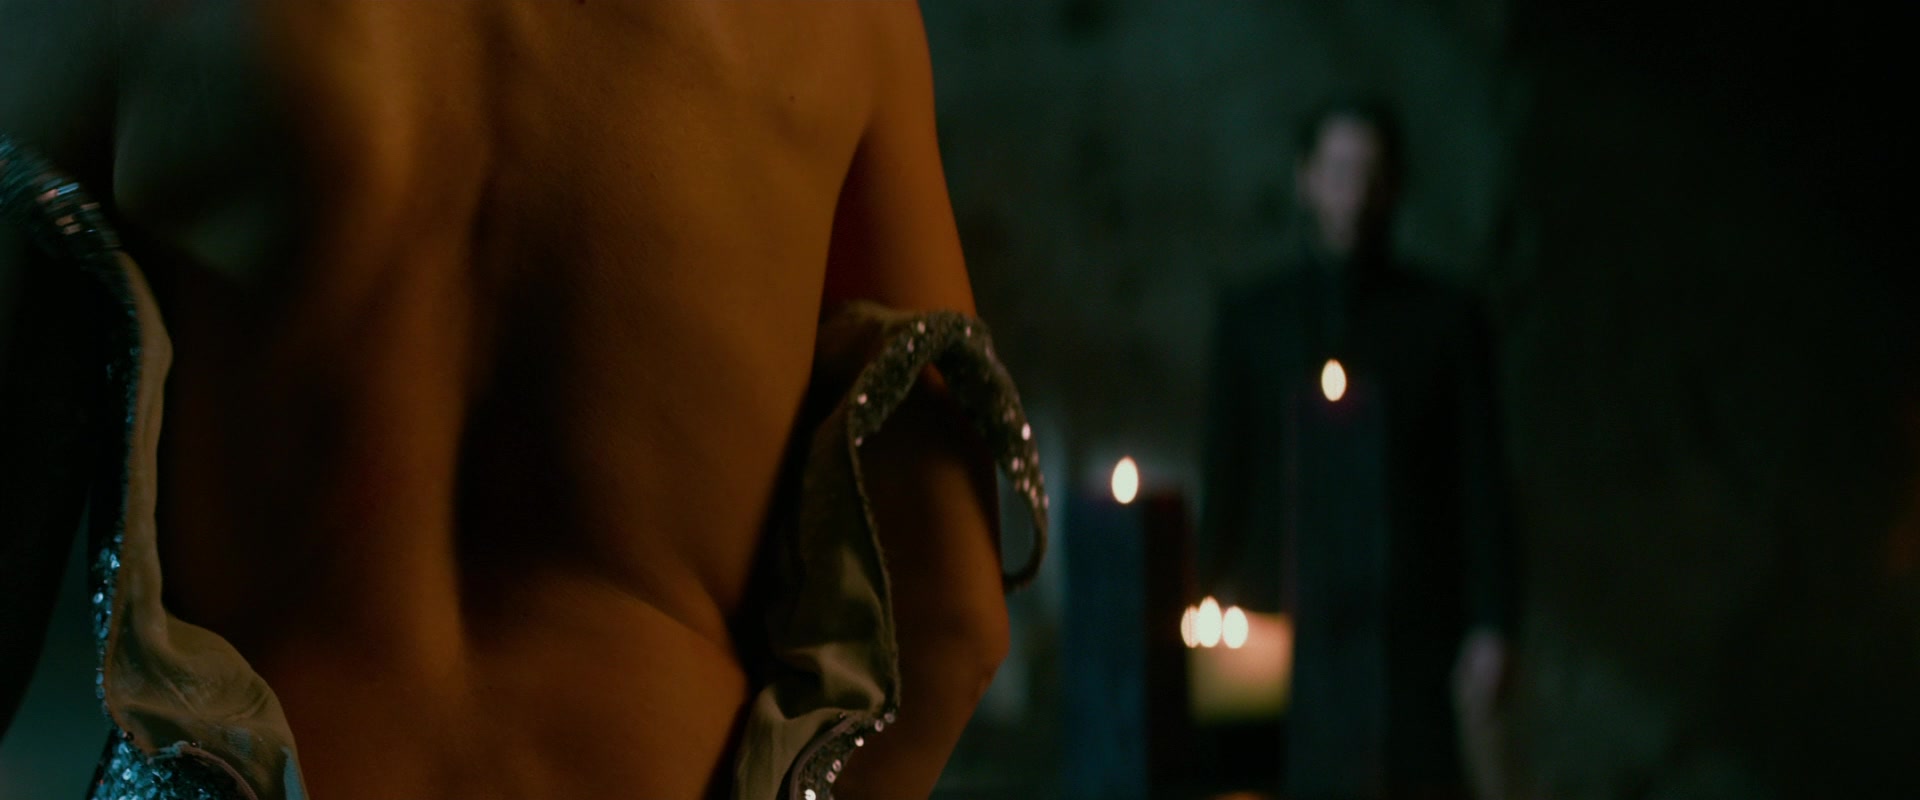 Does john wick have nudity